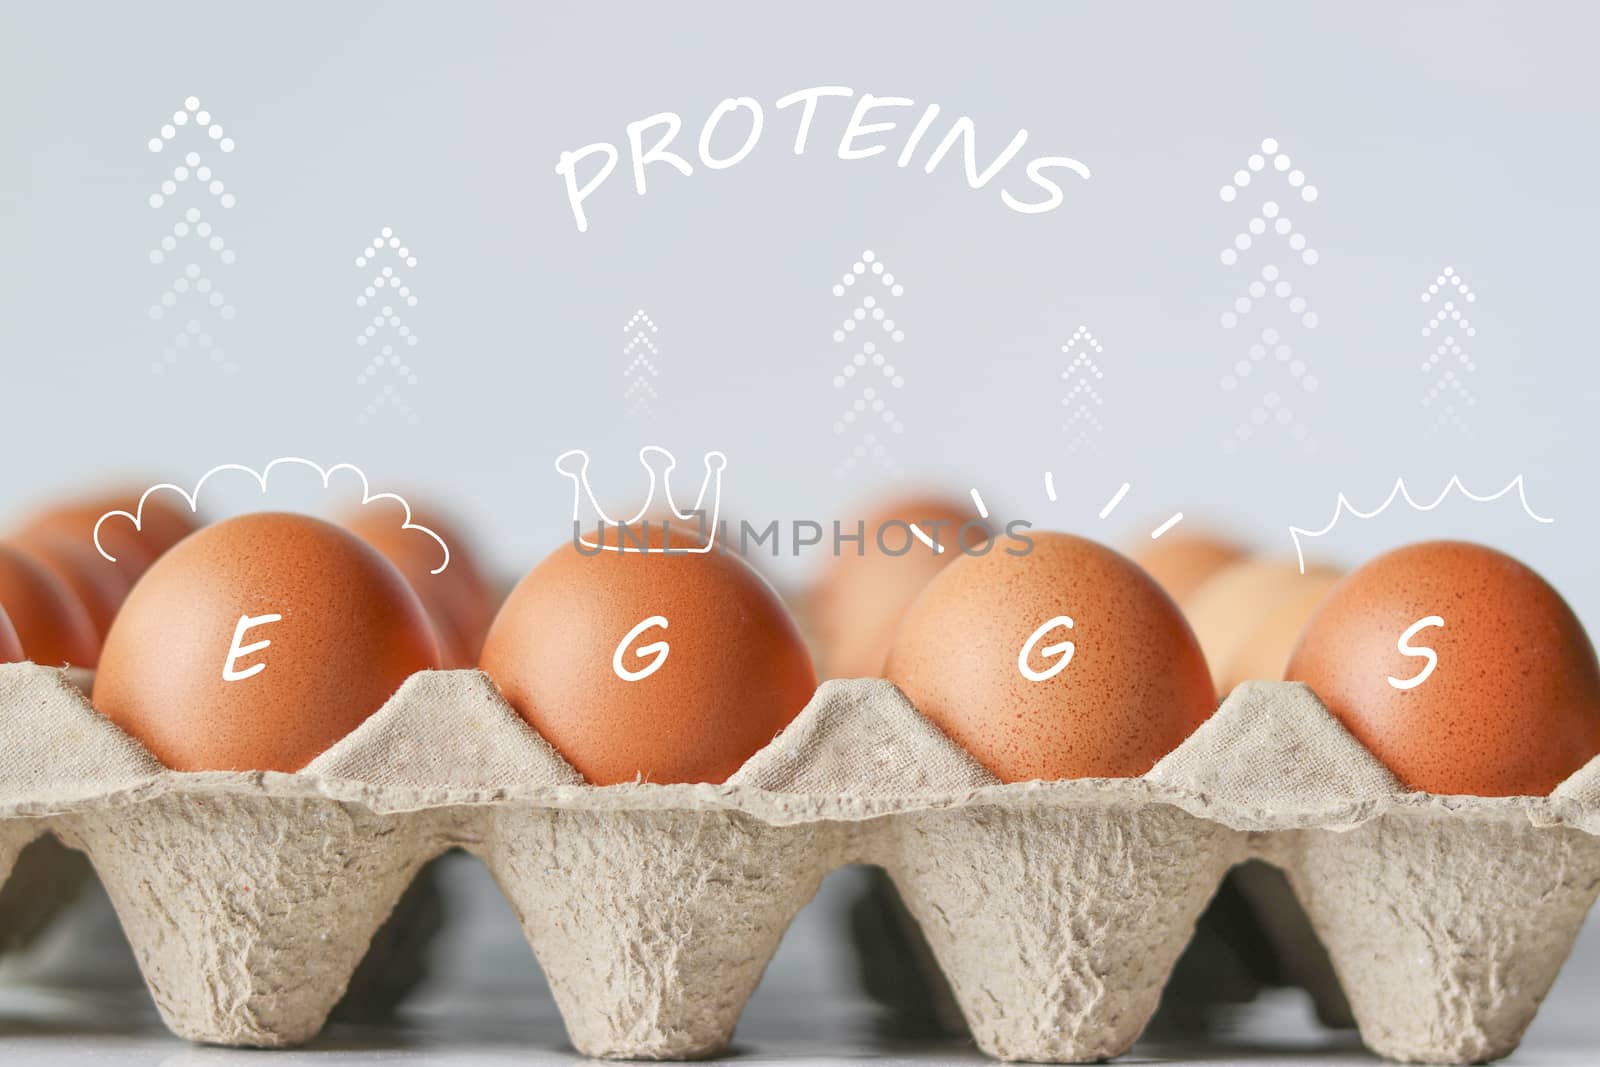 Eggs and arrows that show the high protein value. Eggs with arrow symbol and protein floating above.